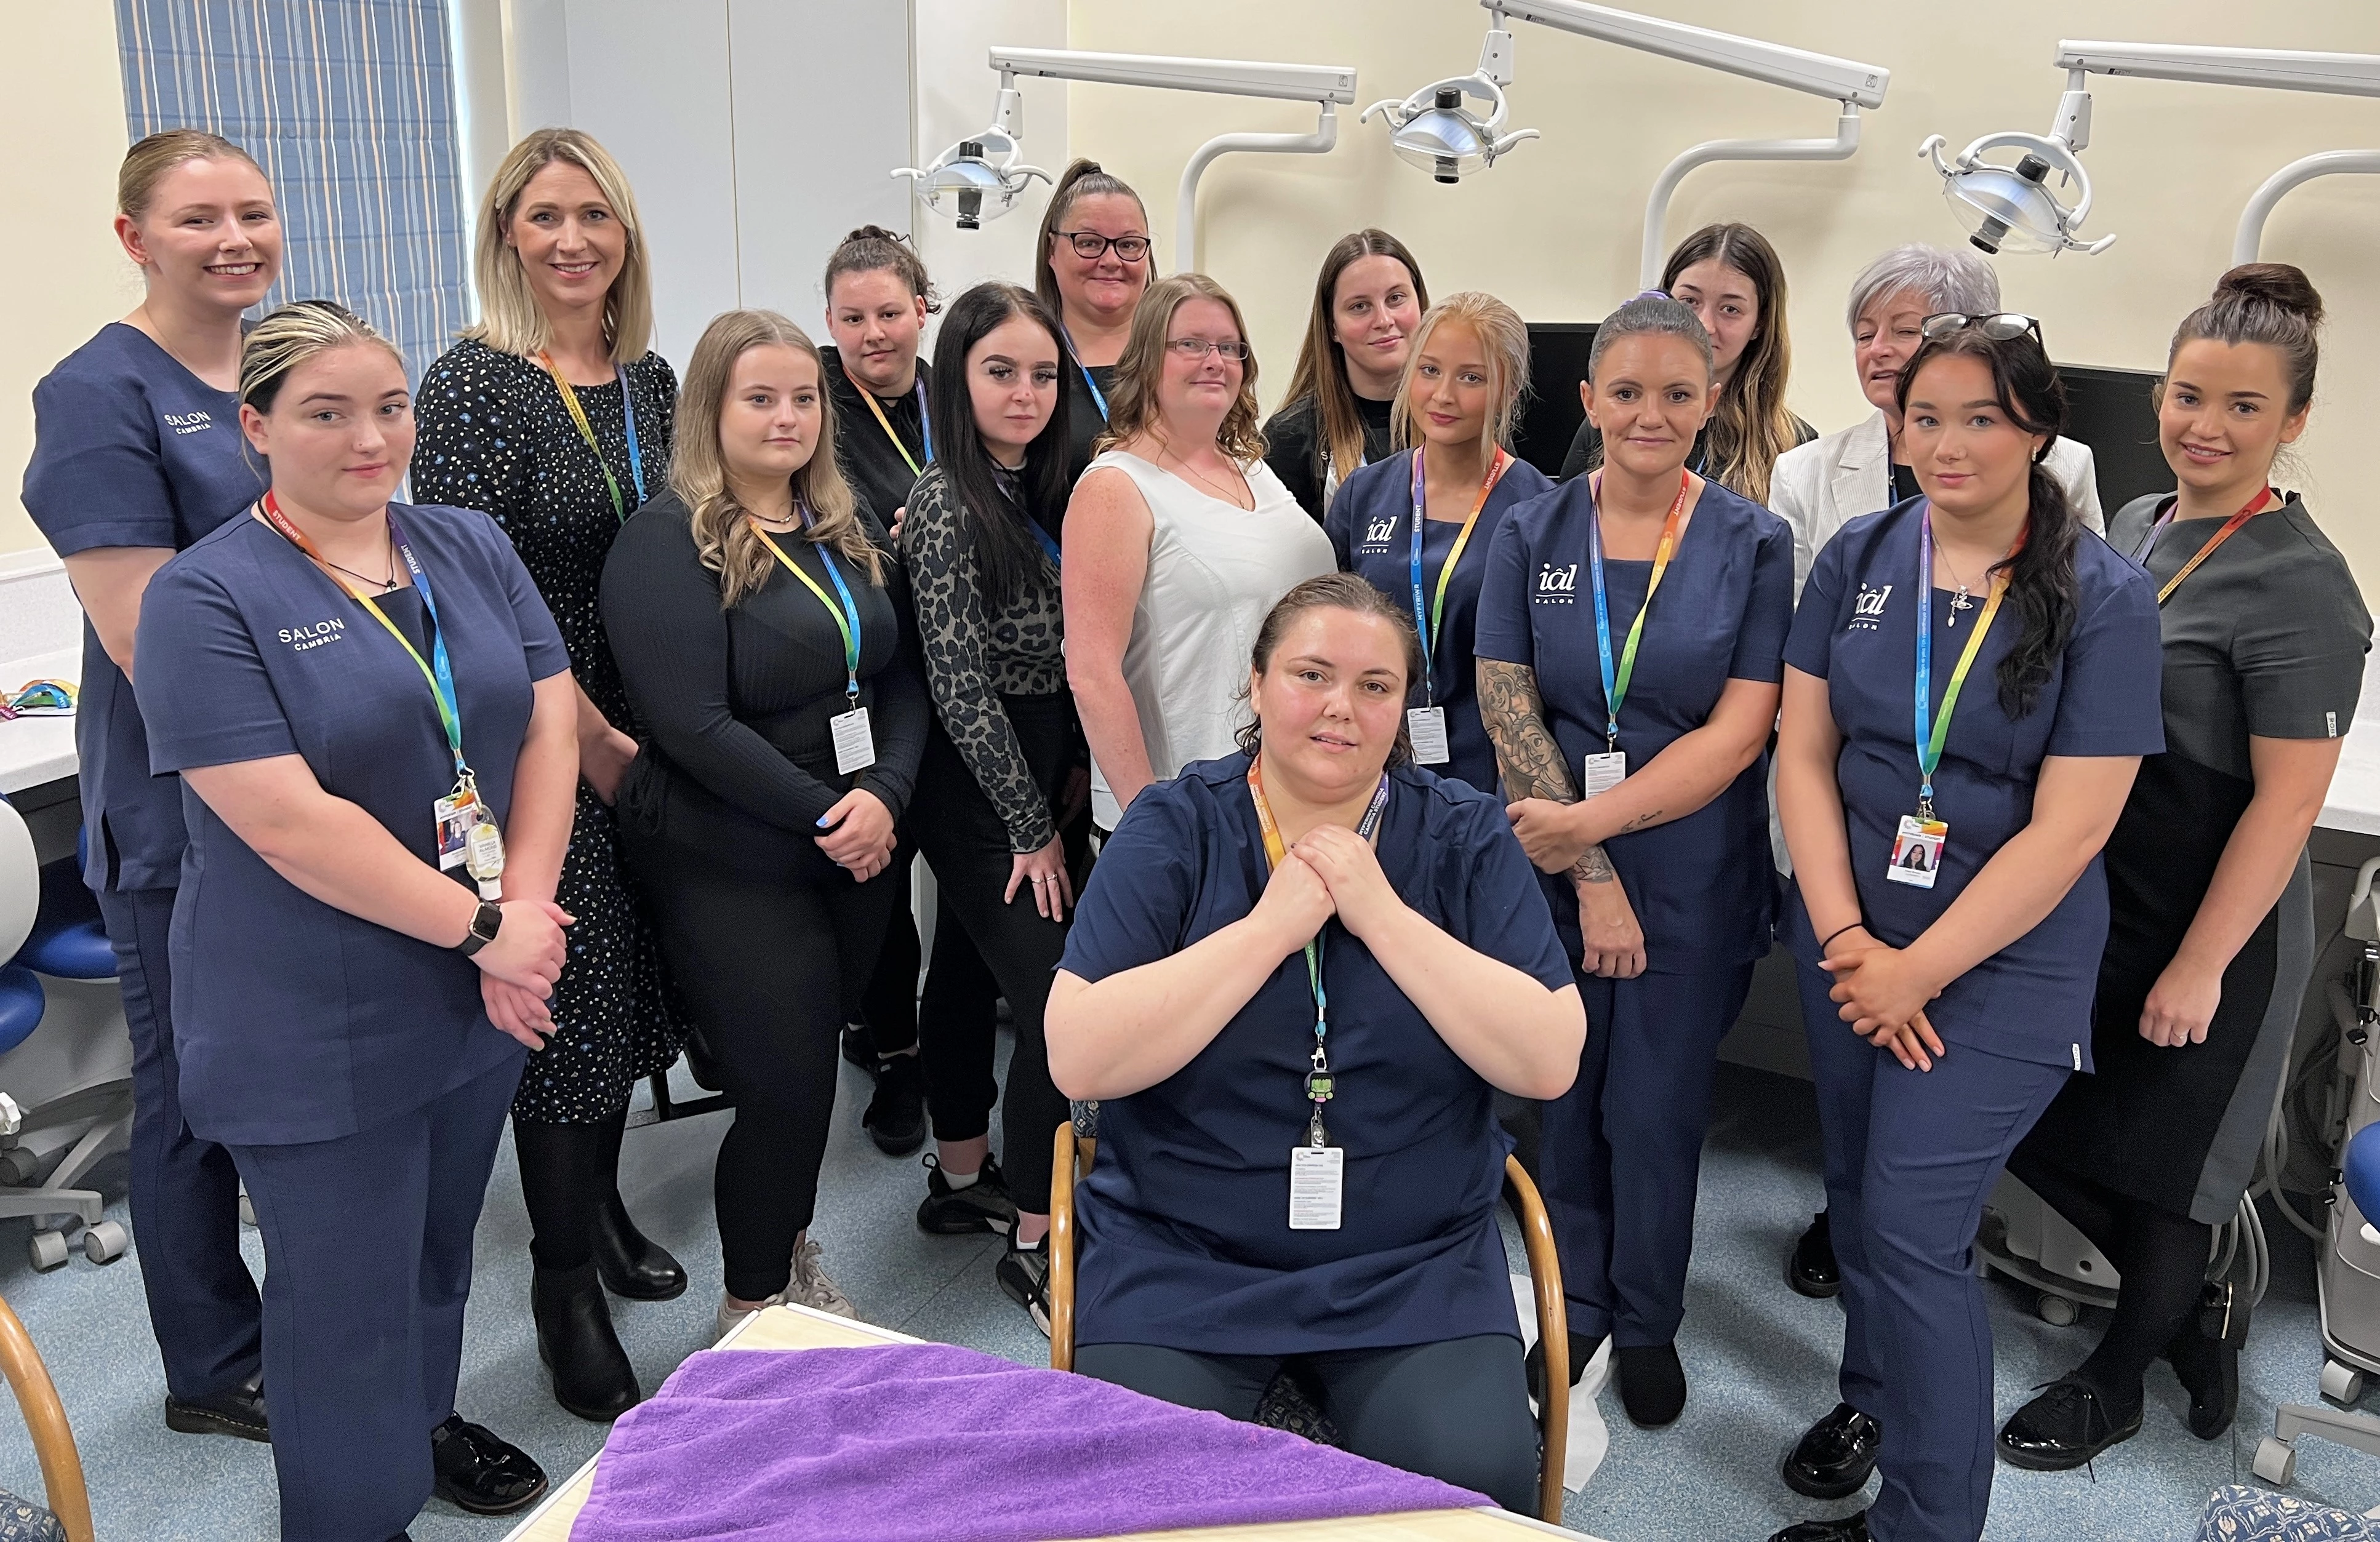 Learners from Coleg Cambria Yale provided complementary wellbeing treatments for clinicians and workers at Wrexham Maelor Hospital